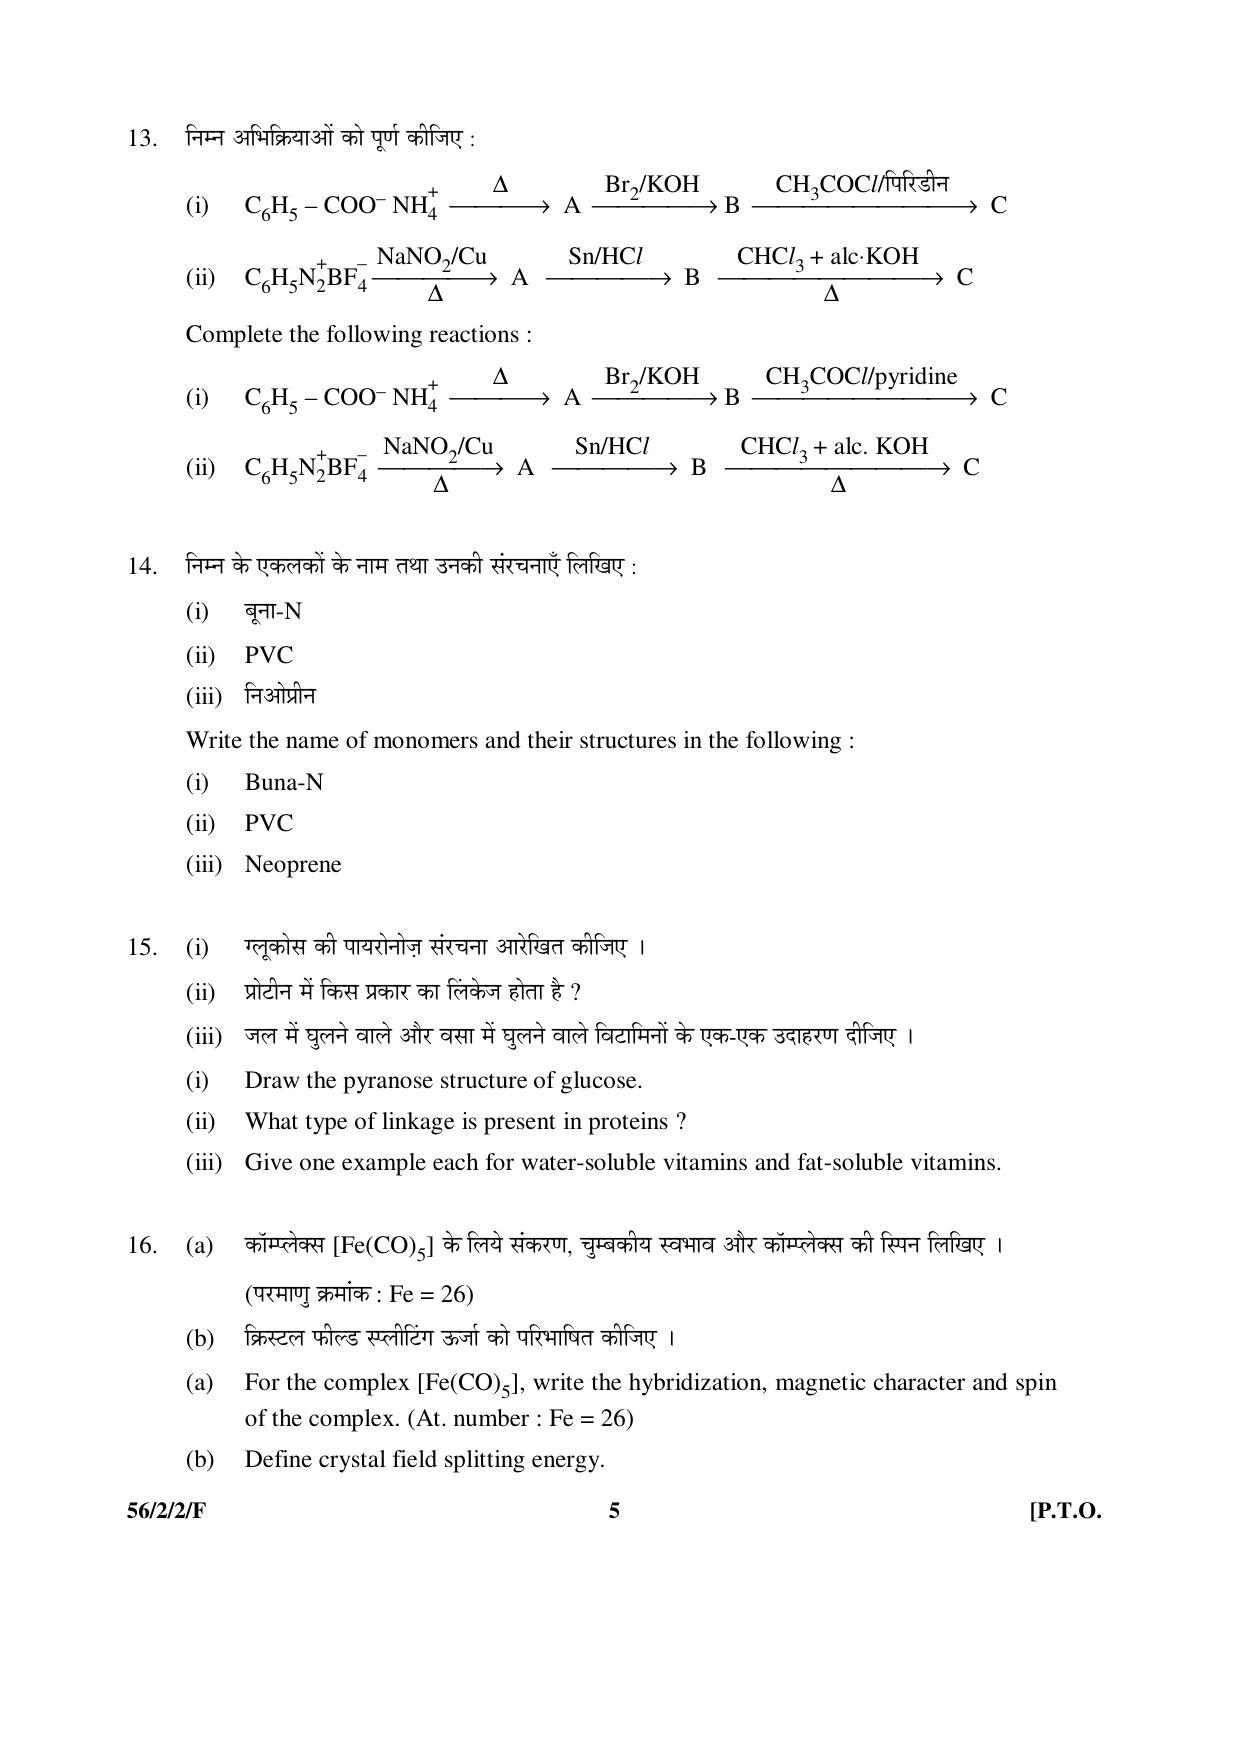 CBSE Class 12 56-2-2-F _Chemistry_ 2016 Question Paper - Page 5